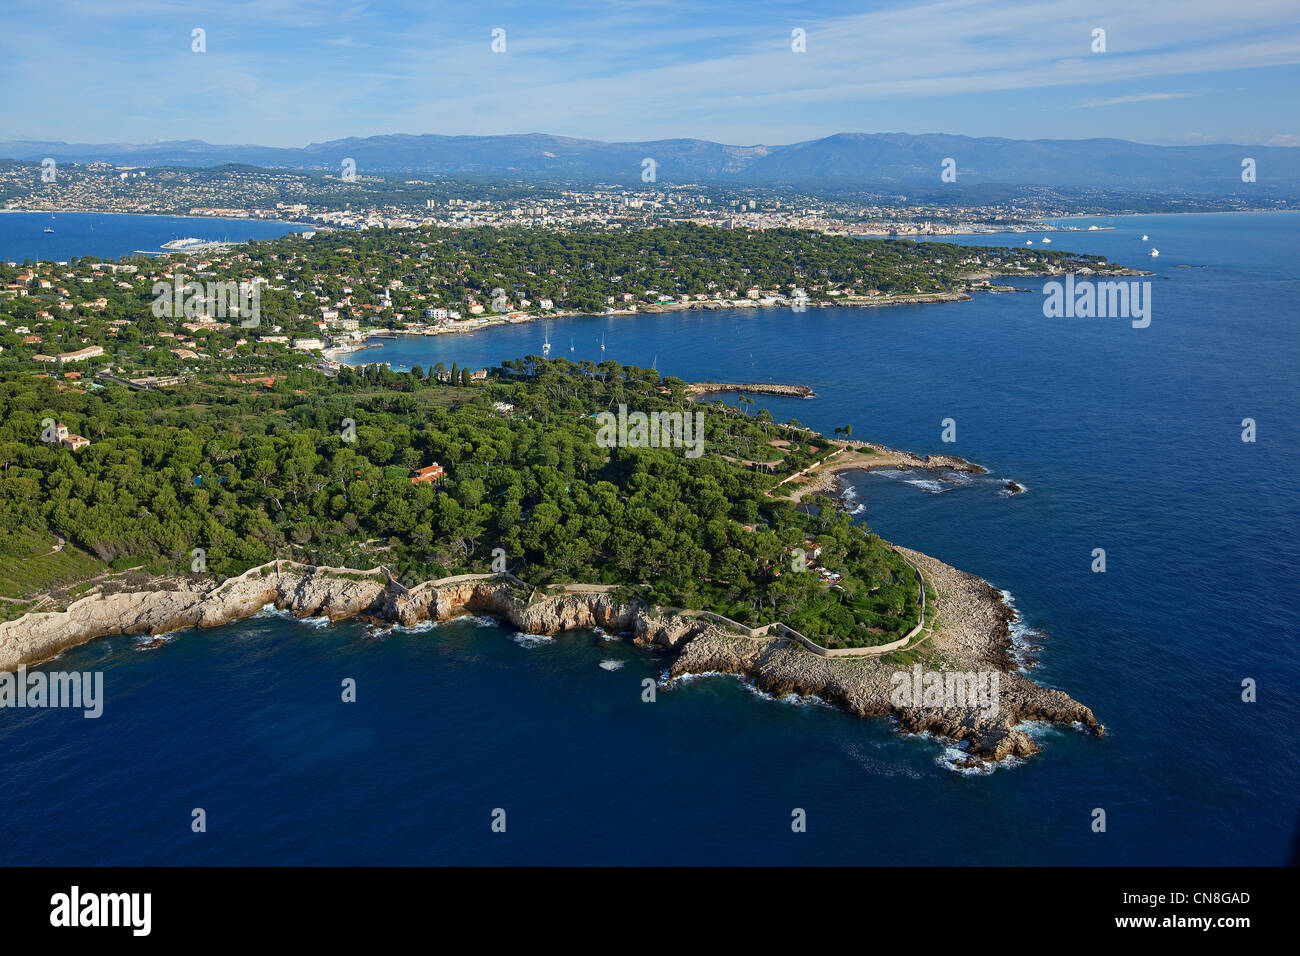 France, Alpes Maritimes, Antibes, Cap d'Antibes, Cap Gros, Garoupe beach in the background (aerial view) Stock Photo